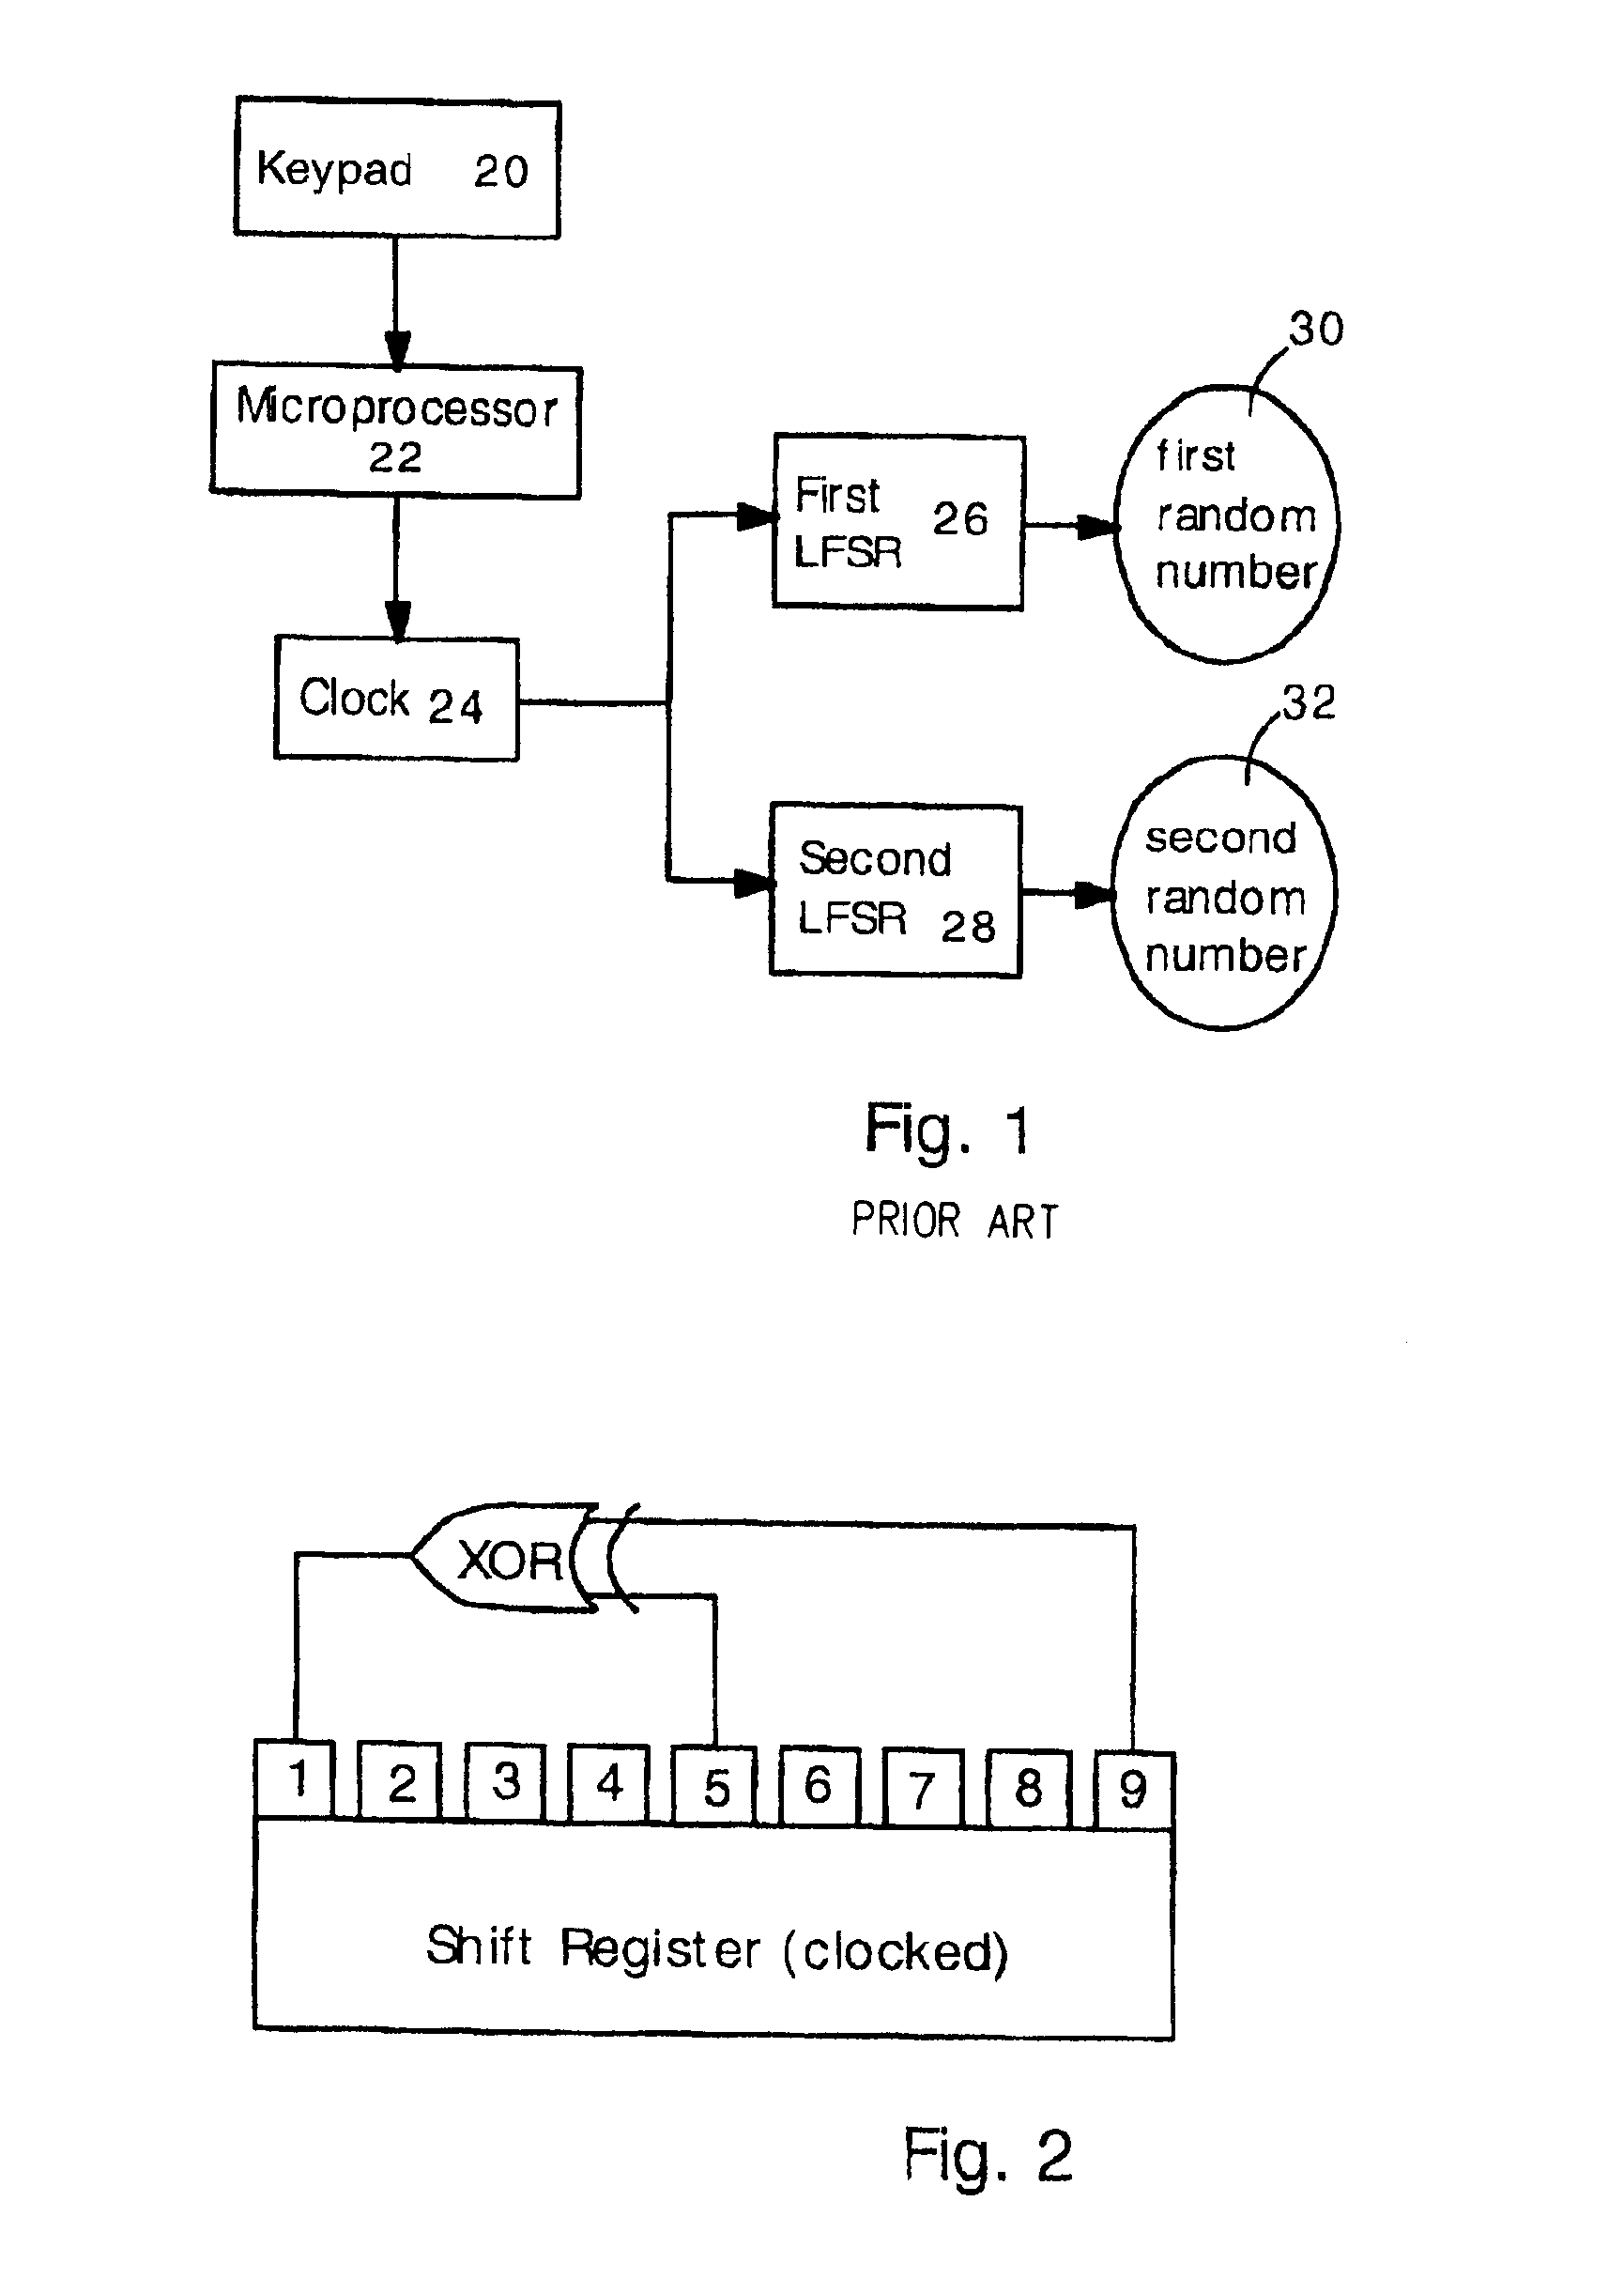 Secure credit card employing pseudo-random bit sequences for authentication